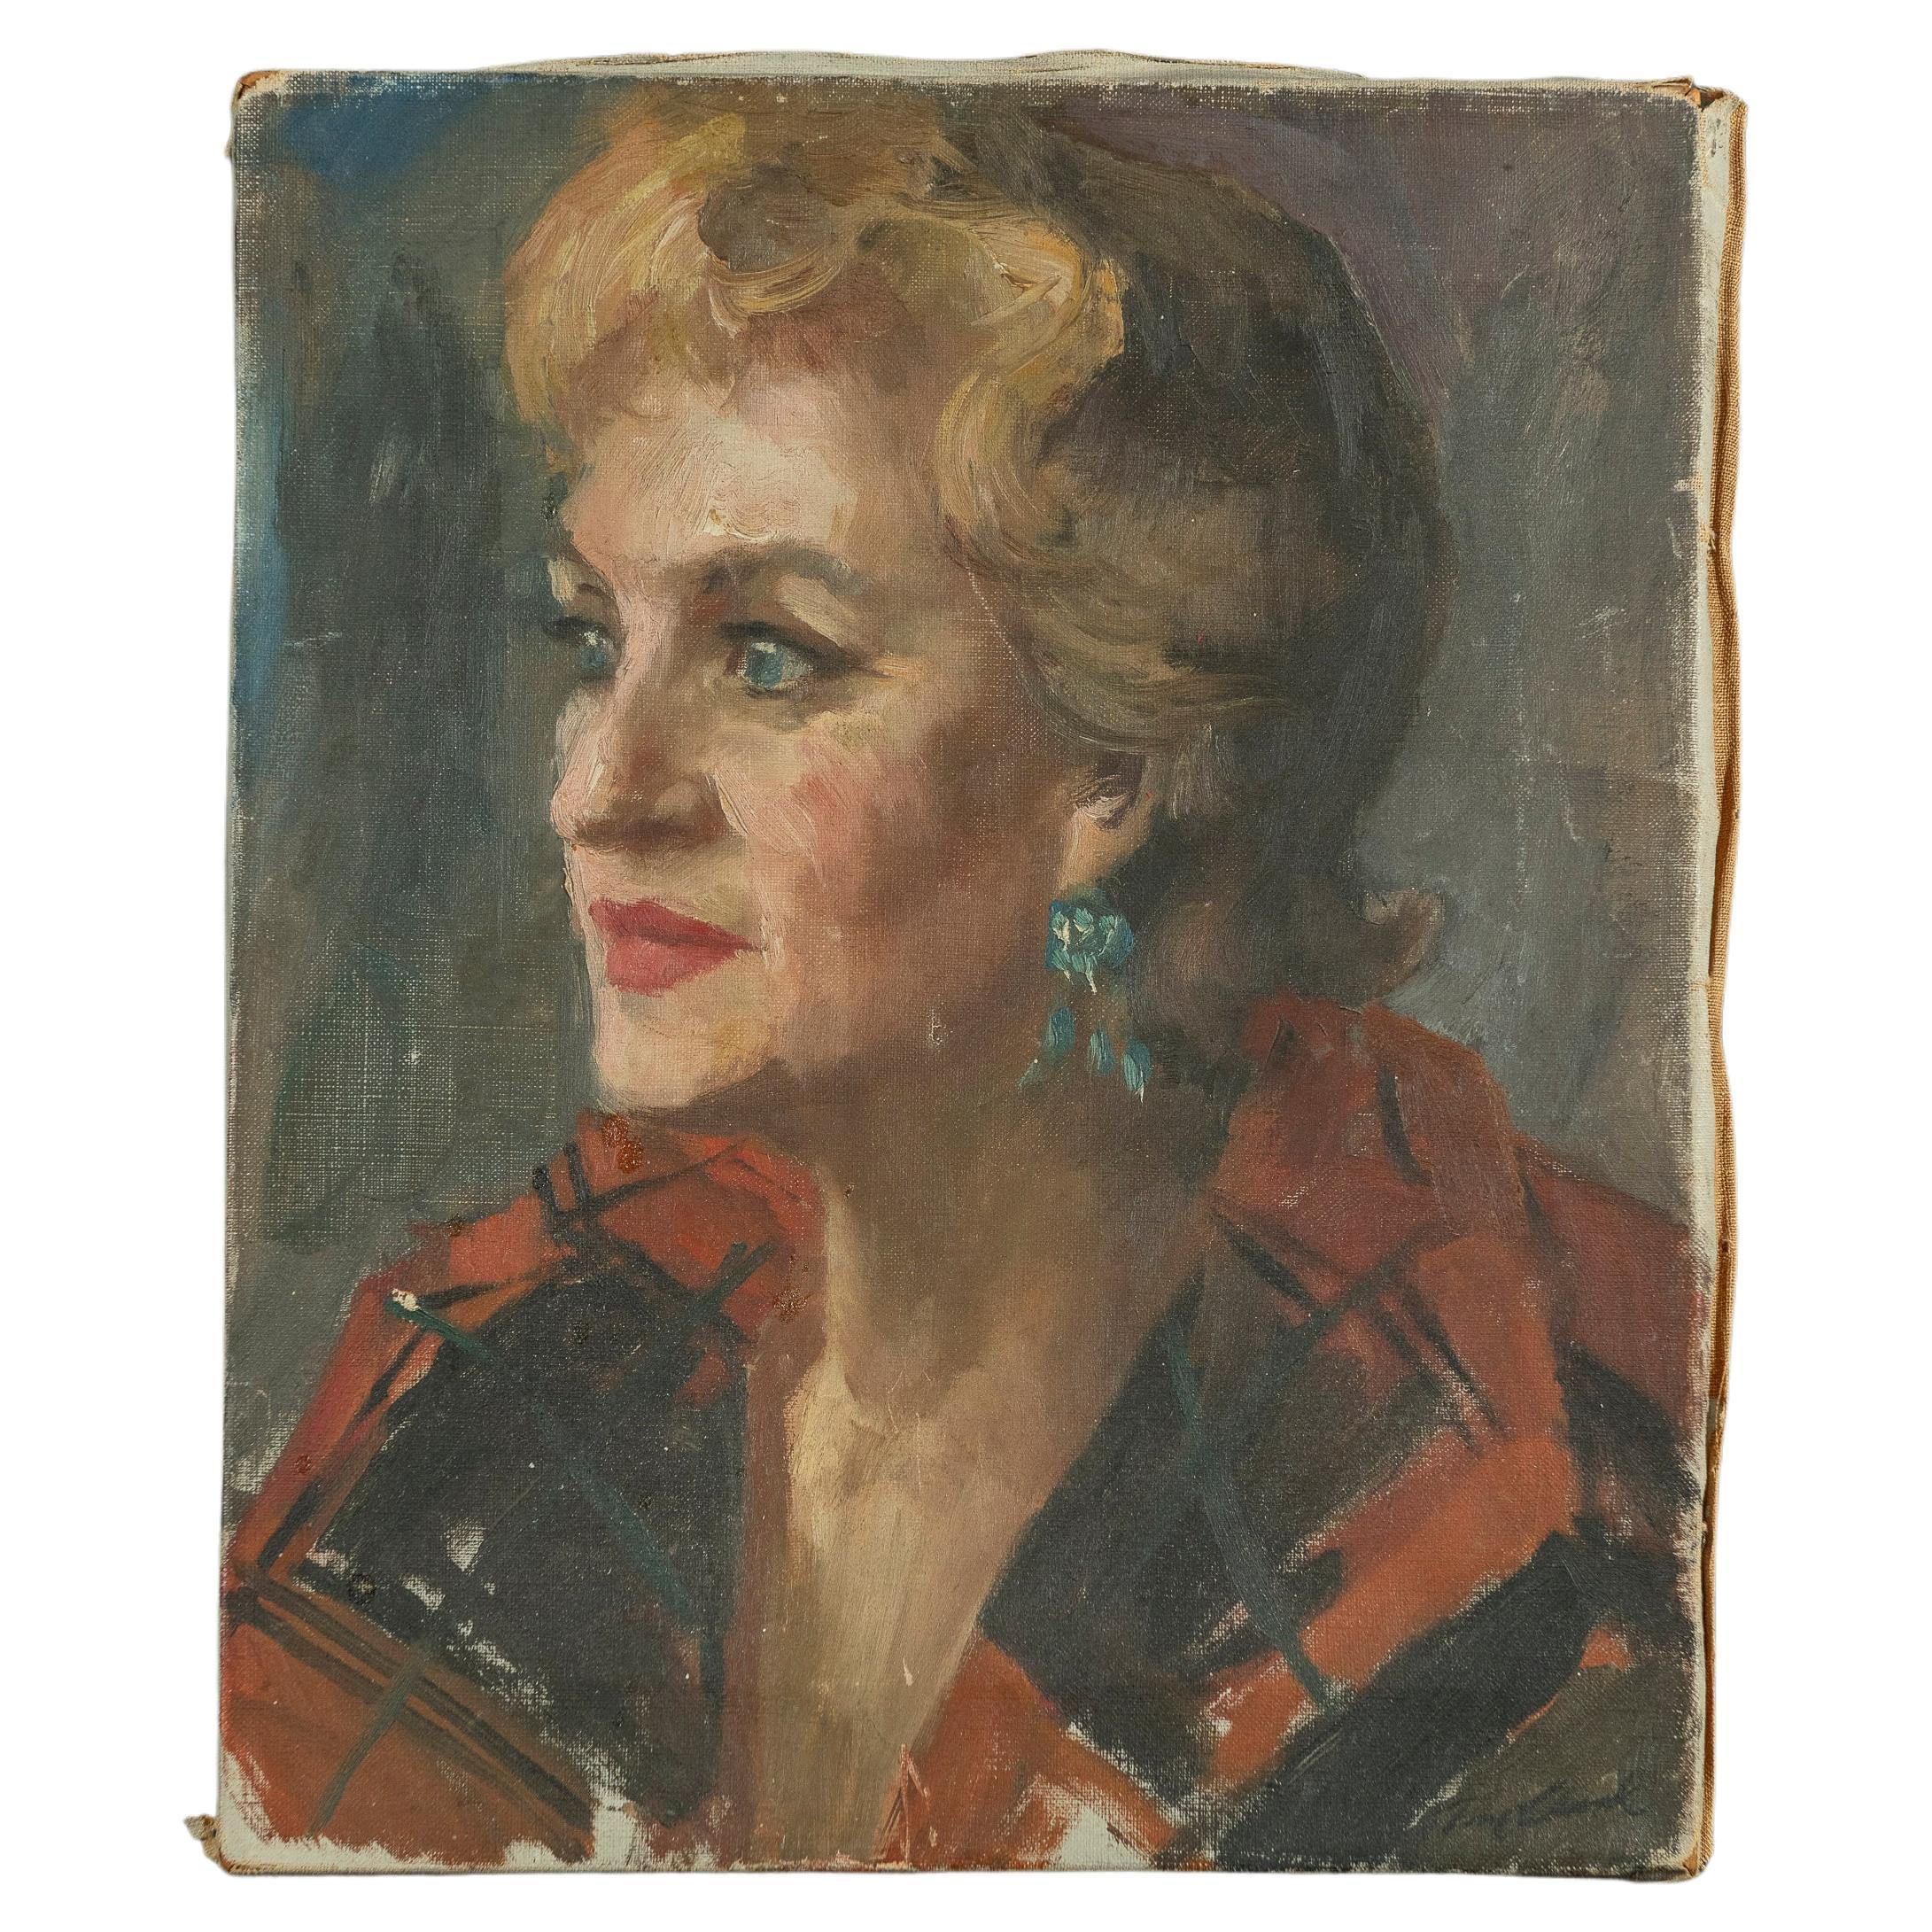 Vintage Portrait of a Woman, Oil on Canvas, Unframed